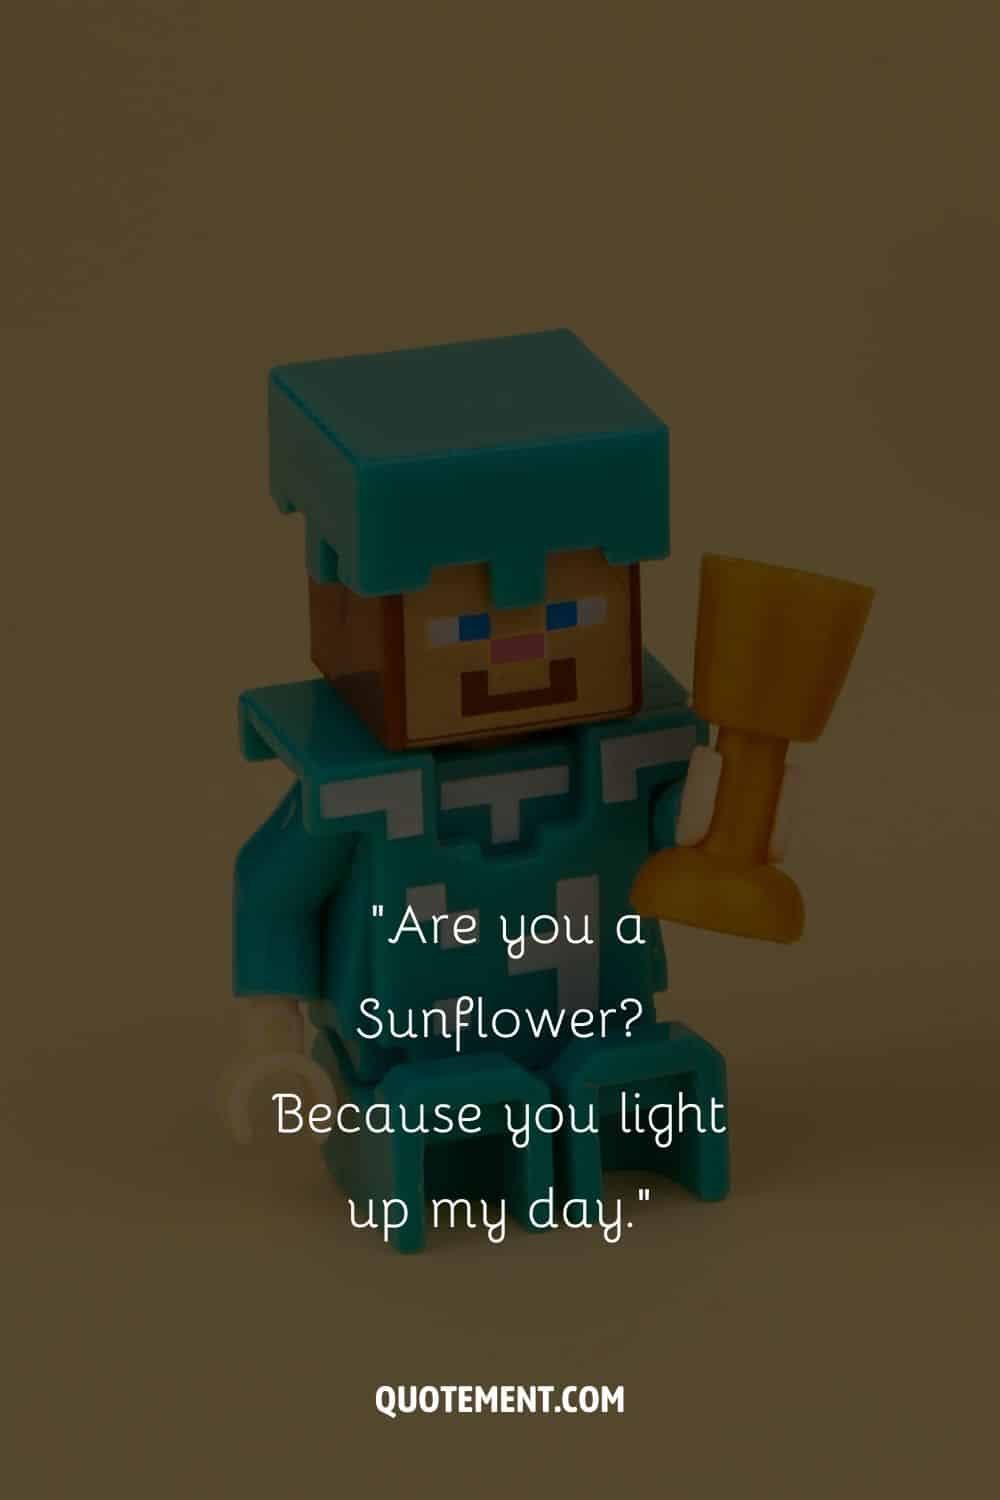 Male character gifts pink companion a flower representing flirty minecraft pickup line